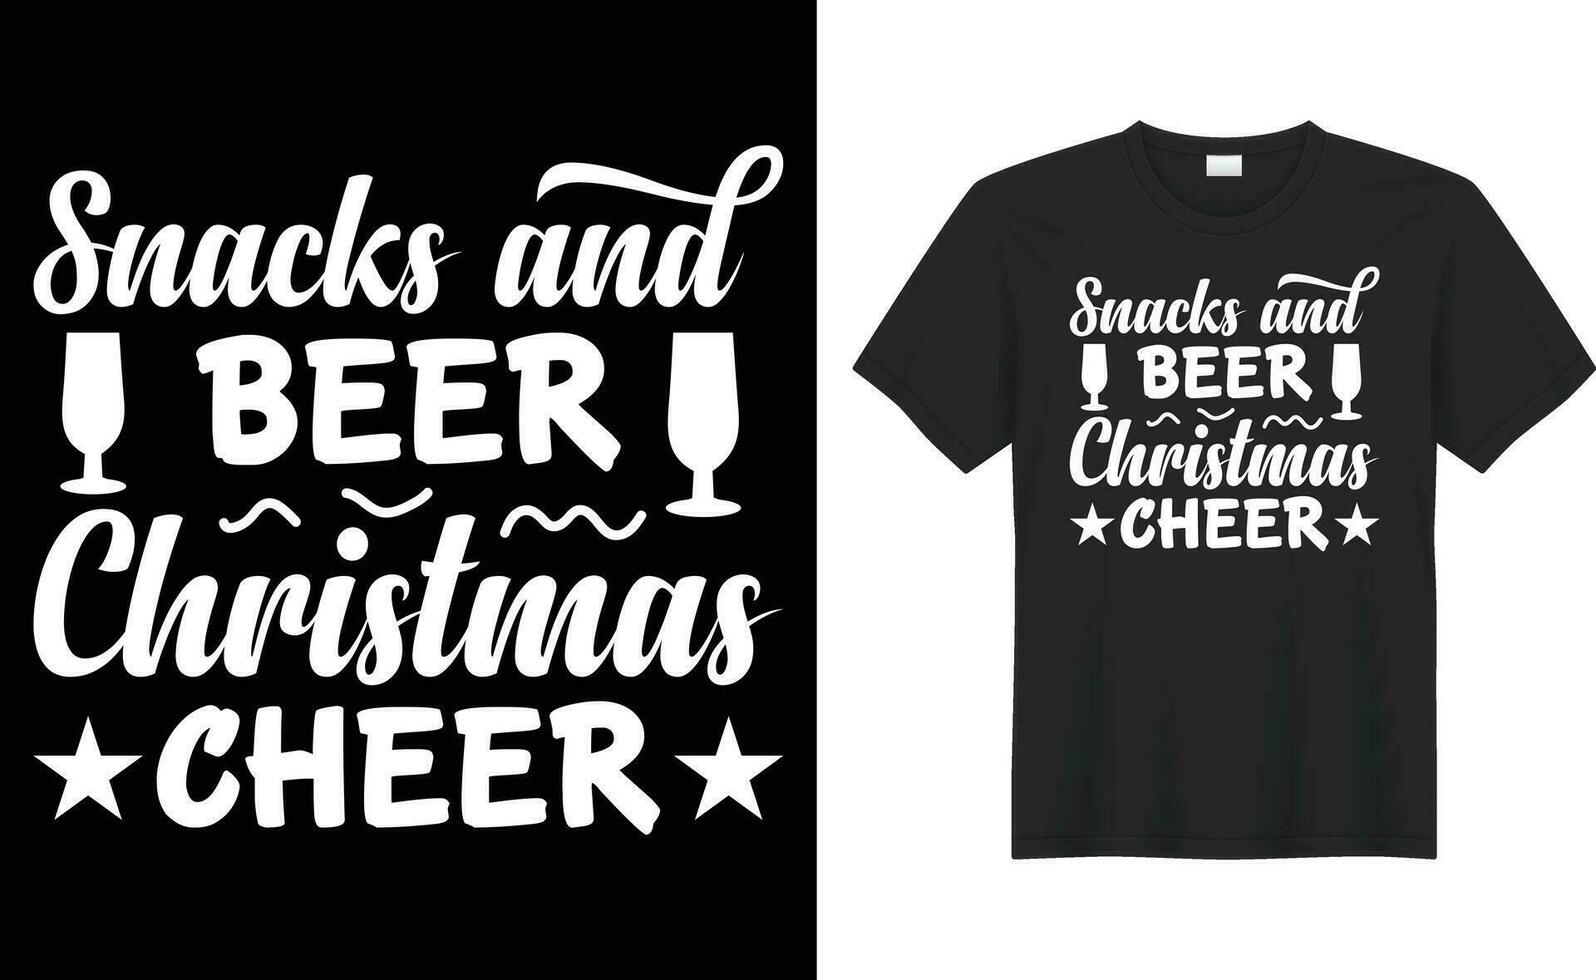 Snacks and beer christmas cheer typography vector t-shirt Design. Perfect for print items and bag, banner, mug, sticker, template. Handwritten vector illustration. Isolated on black background.